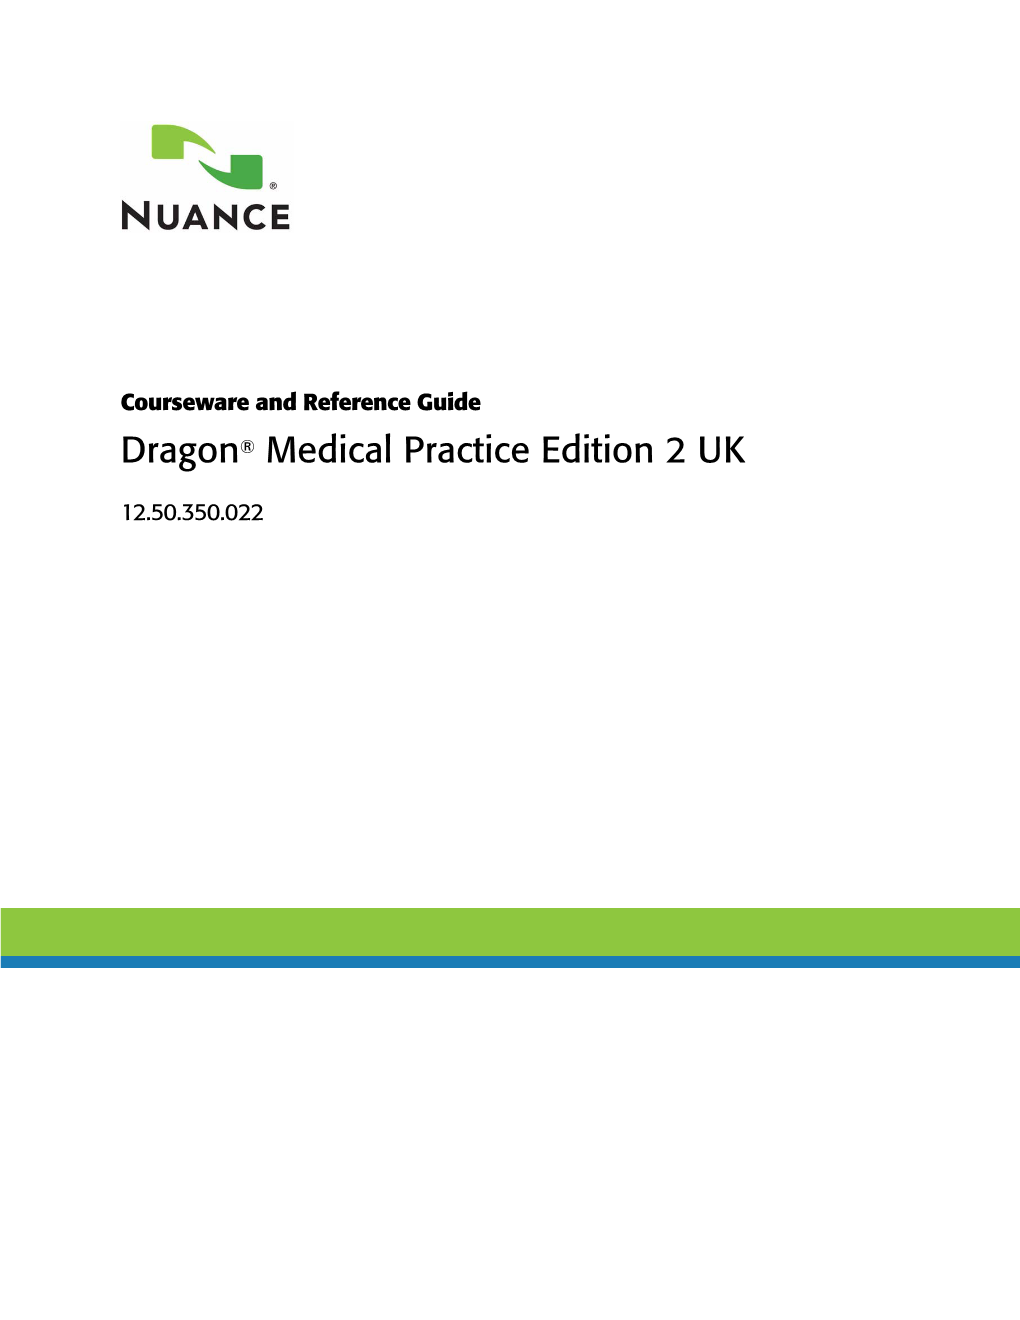 Dragon Medical Practice Edition 2 UK Courseware and Reference Guide